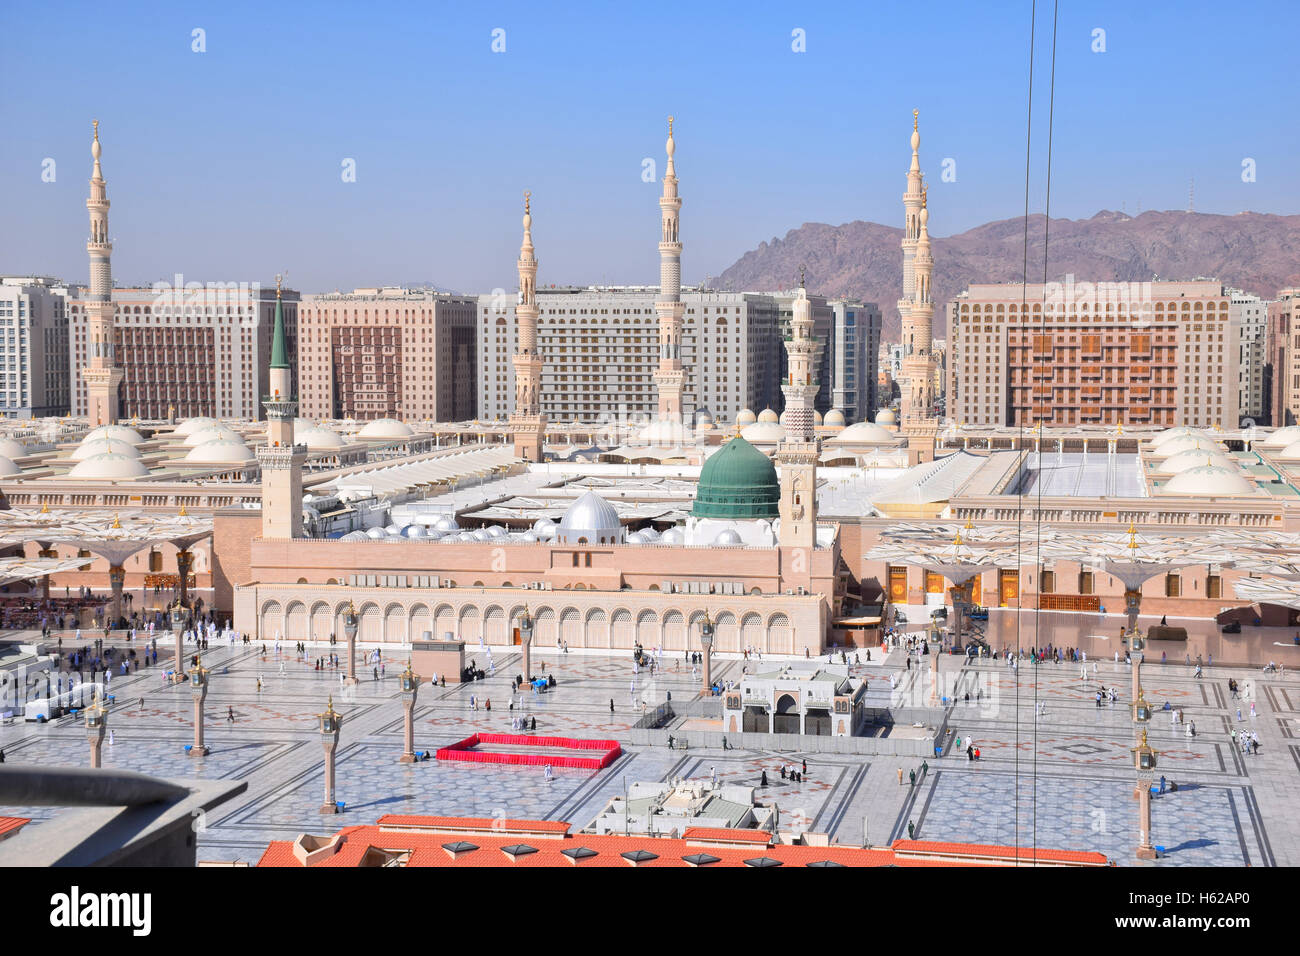 General view of the Prophet's Mosque (Al Masjid Al Nabawi) Stock Photo